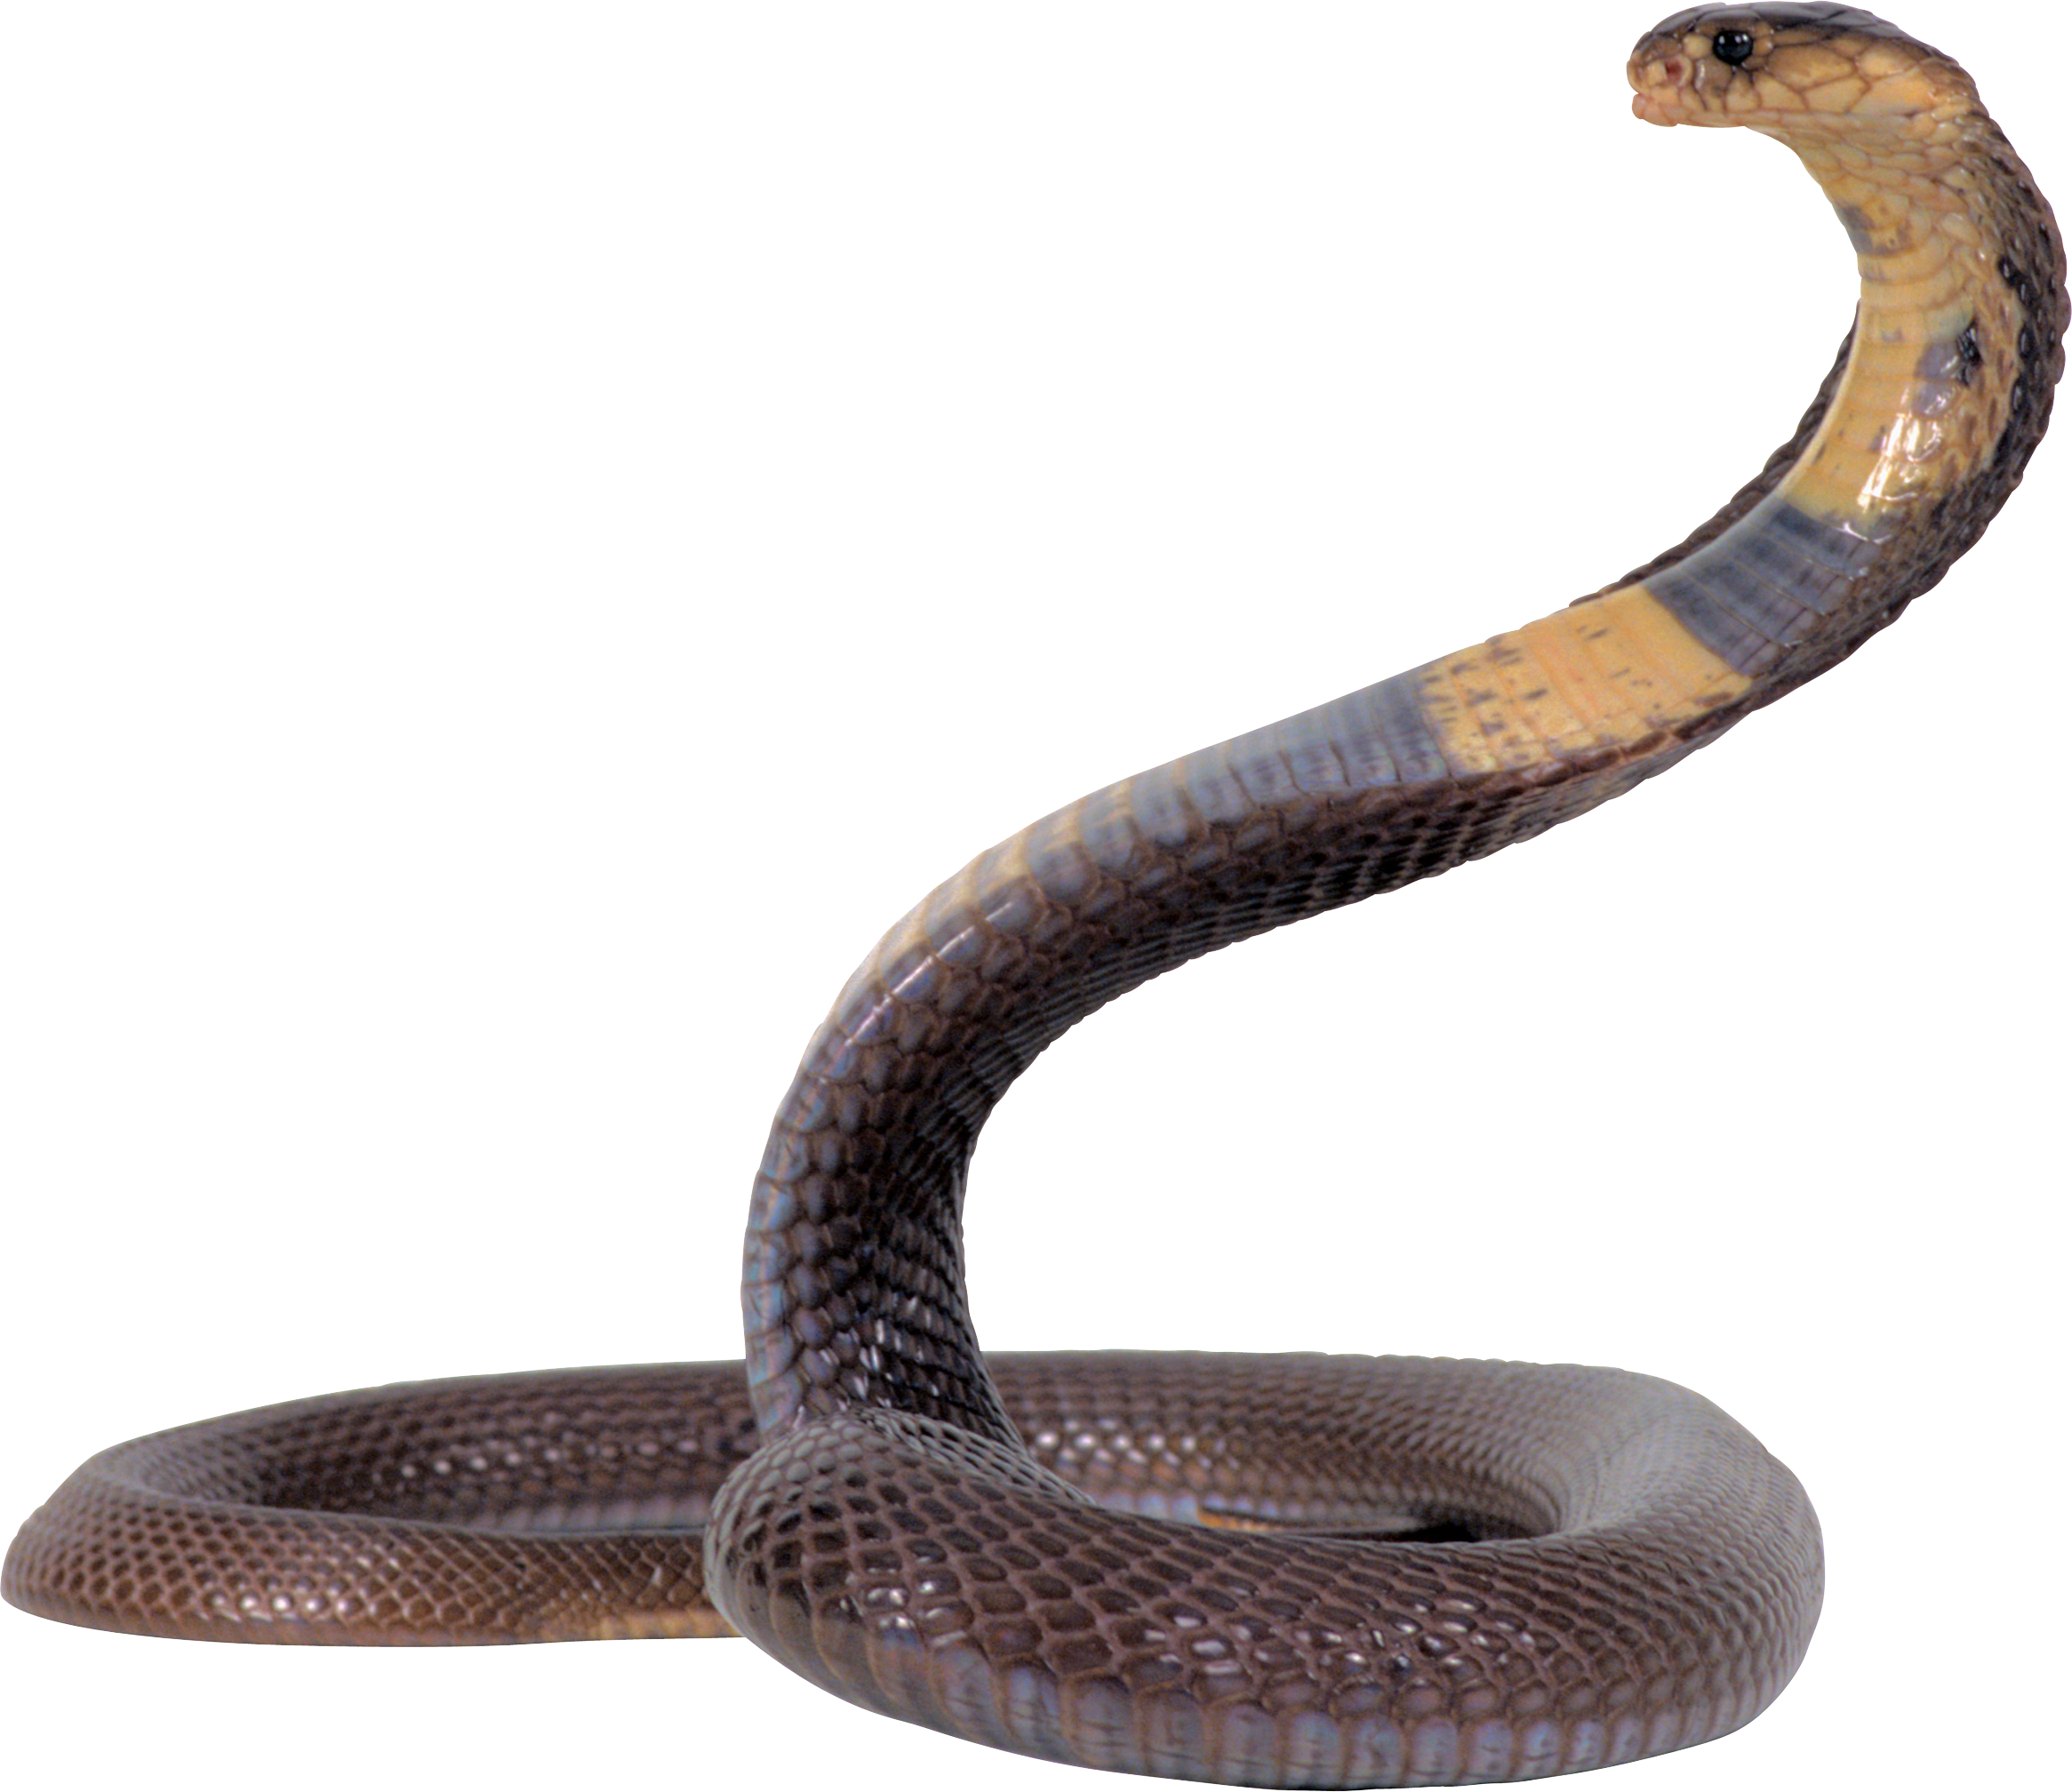 Cobra snake PNG image, free download picture transparent image download,  size: 2331x2016px